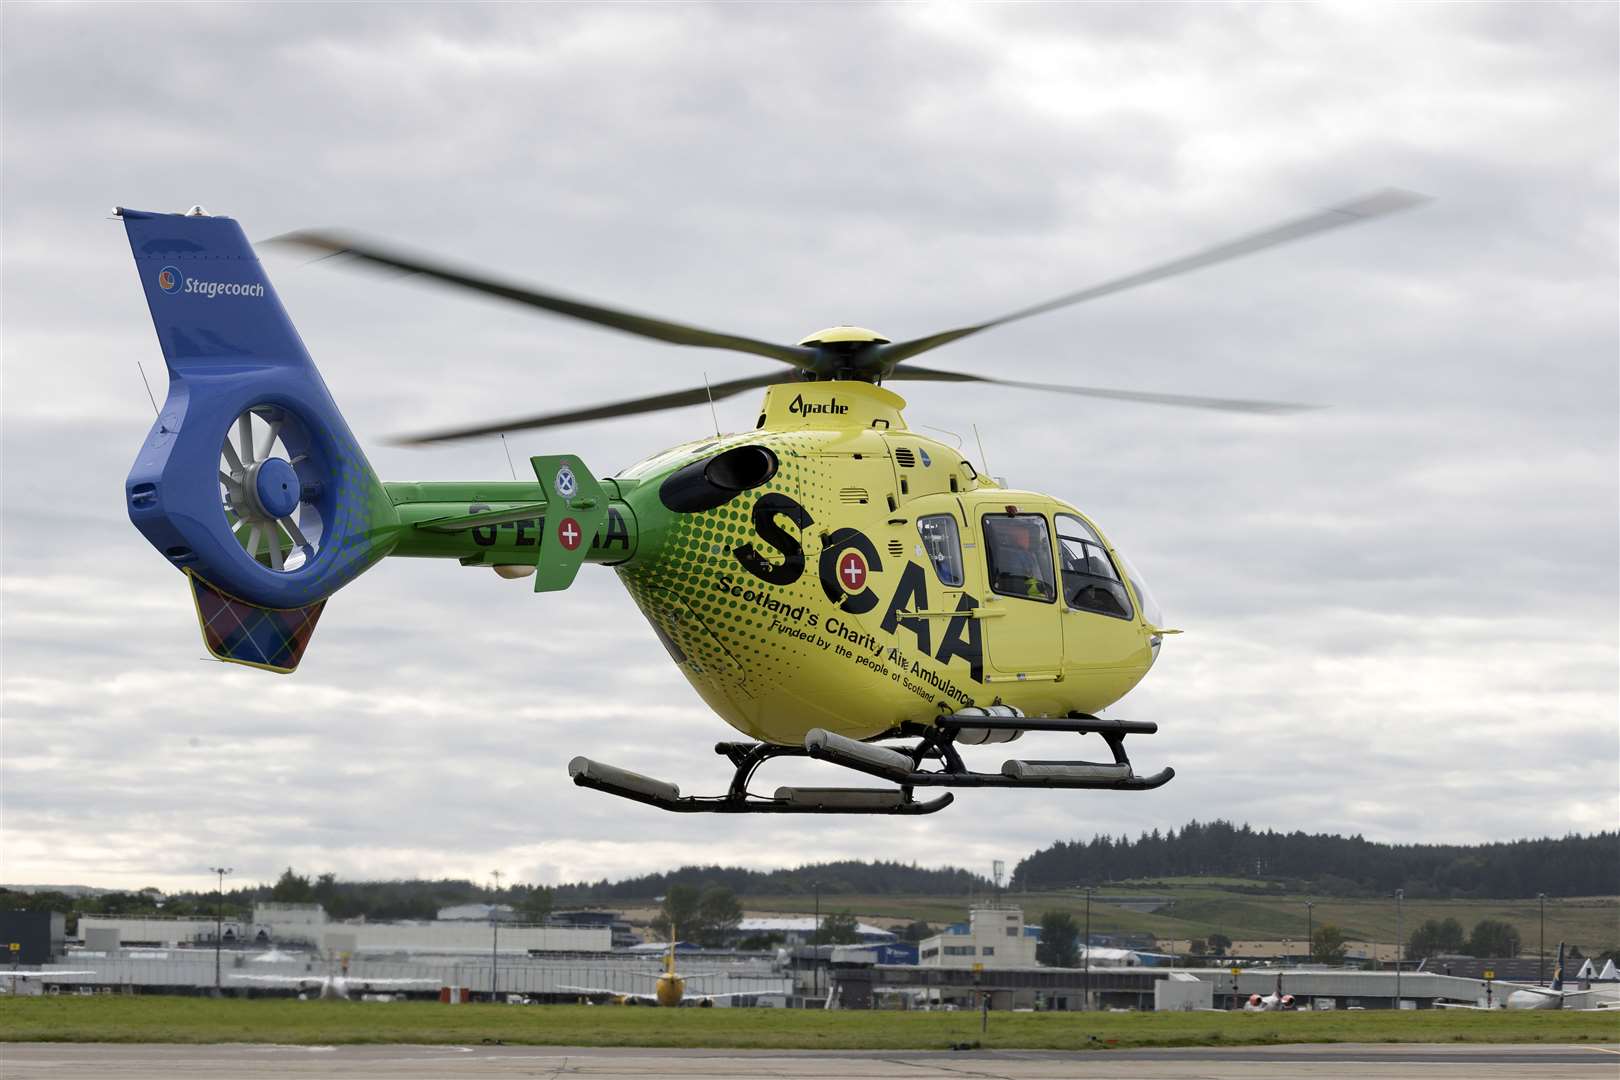 Scotland’s Charity Air Ambulance Base, Aberdeen (SCAA) home to Helimed 79 Helimed-79 lifts from Aberdeen Airport en-route to Orkney Picture: Graeme Hart